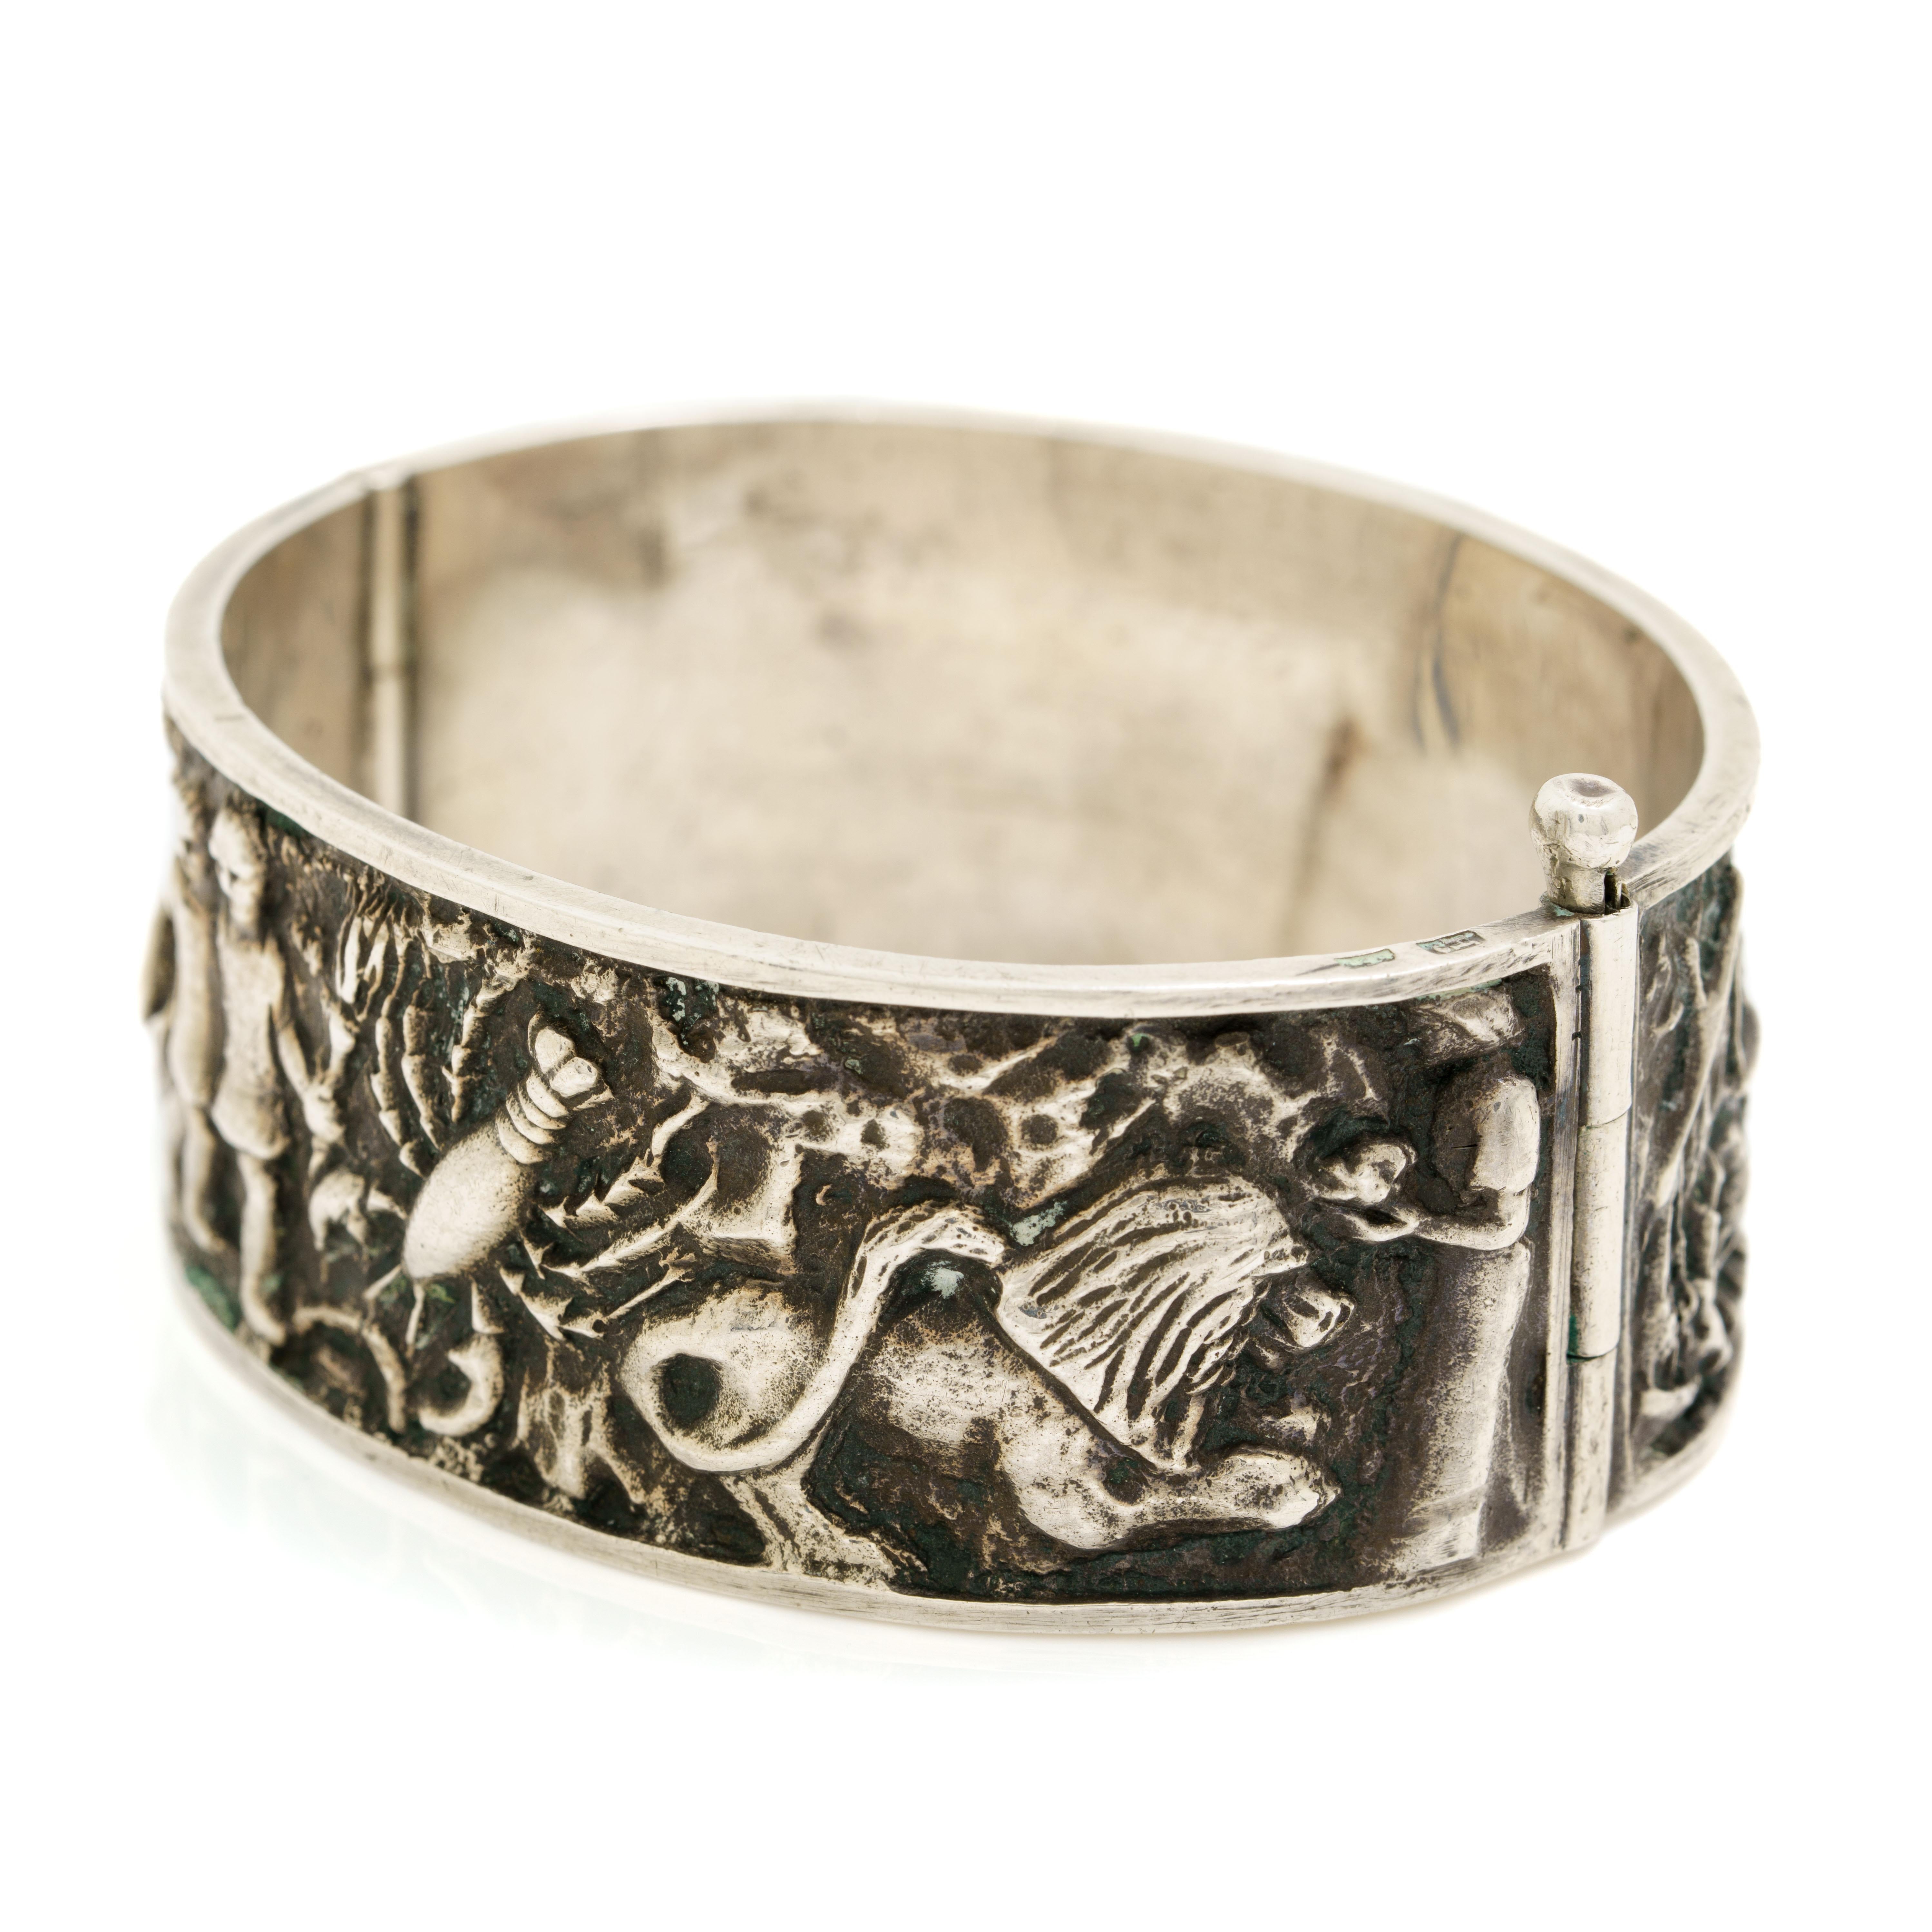 Antique Silver Etruscan Revival Astrological Zodiac Bangle In Good Condition For Sale In New York, NY